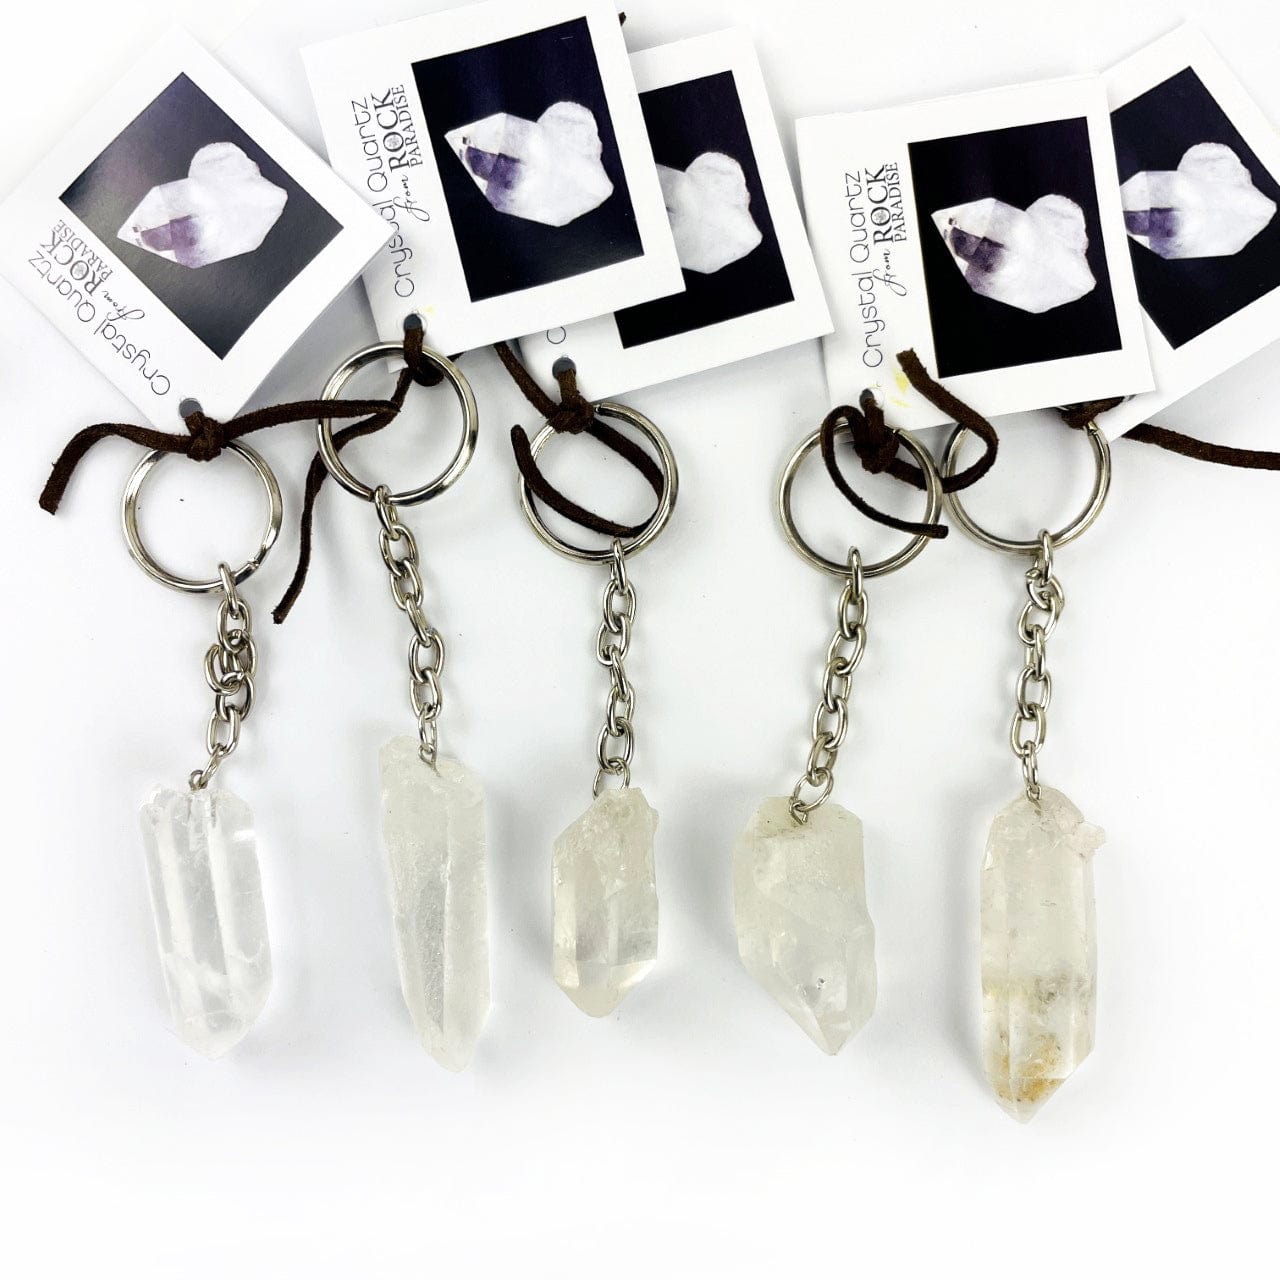 5 Crystal Quartz Keychains with tags on a table showing size and shape variations of this stock.